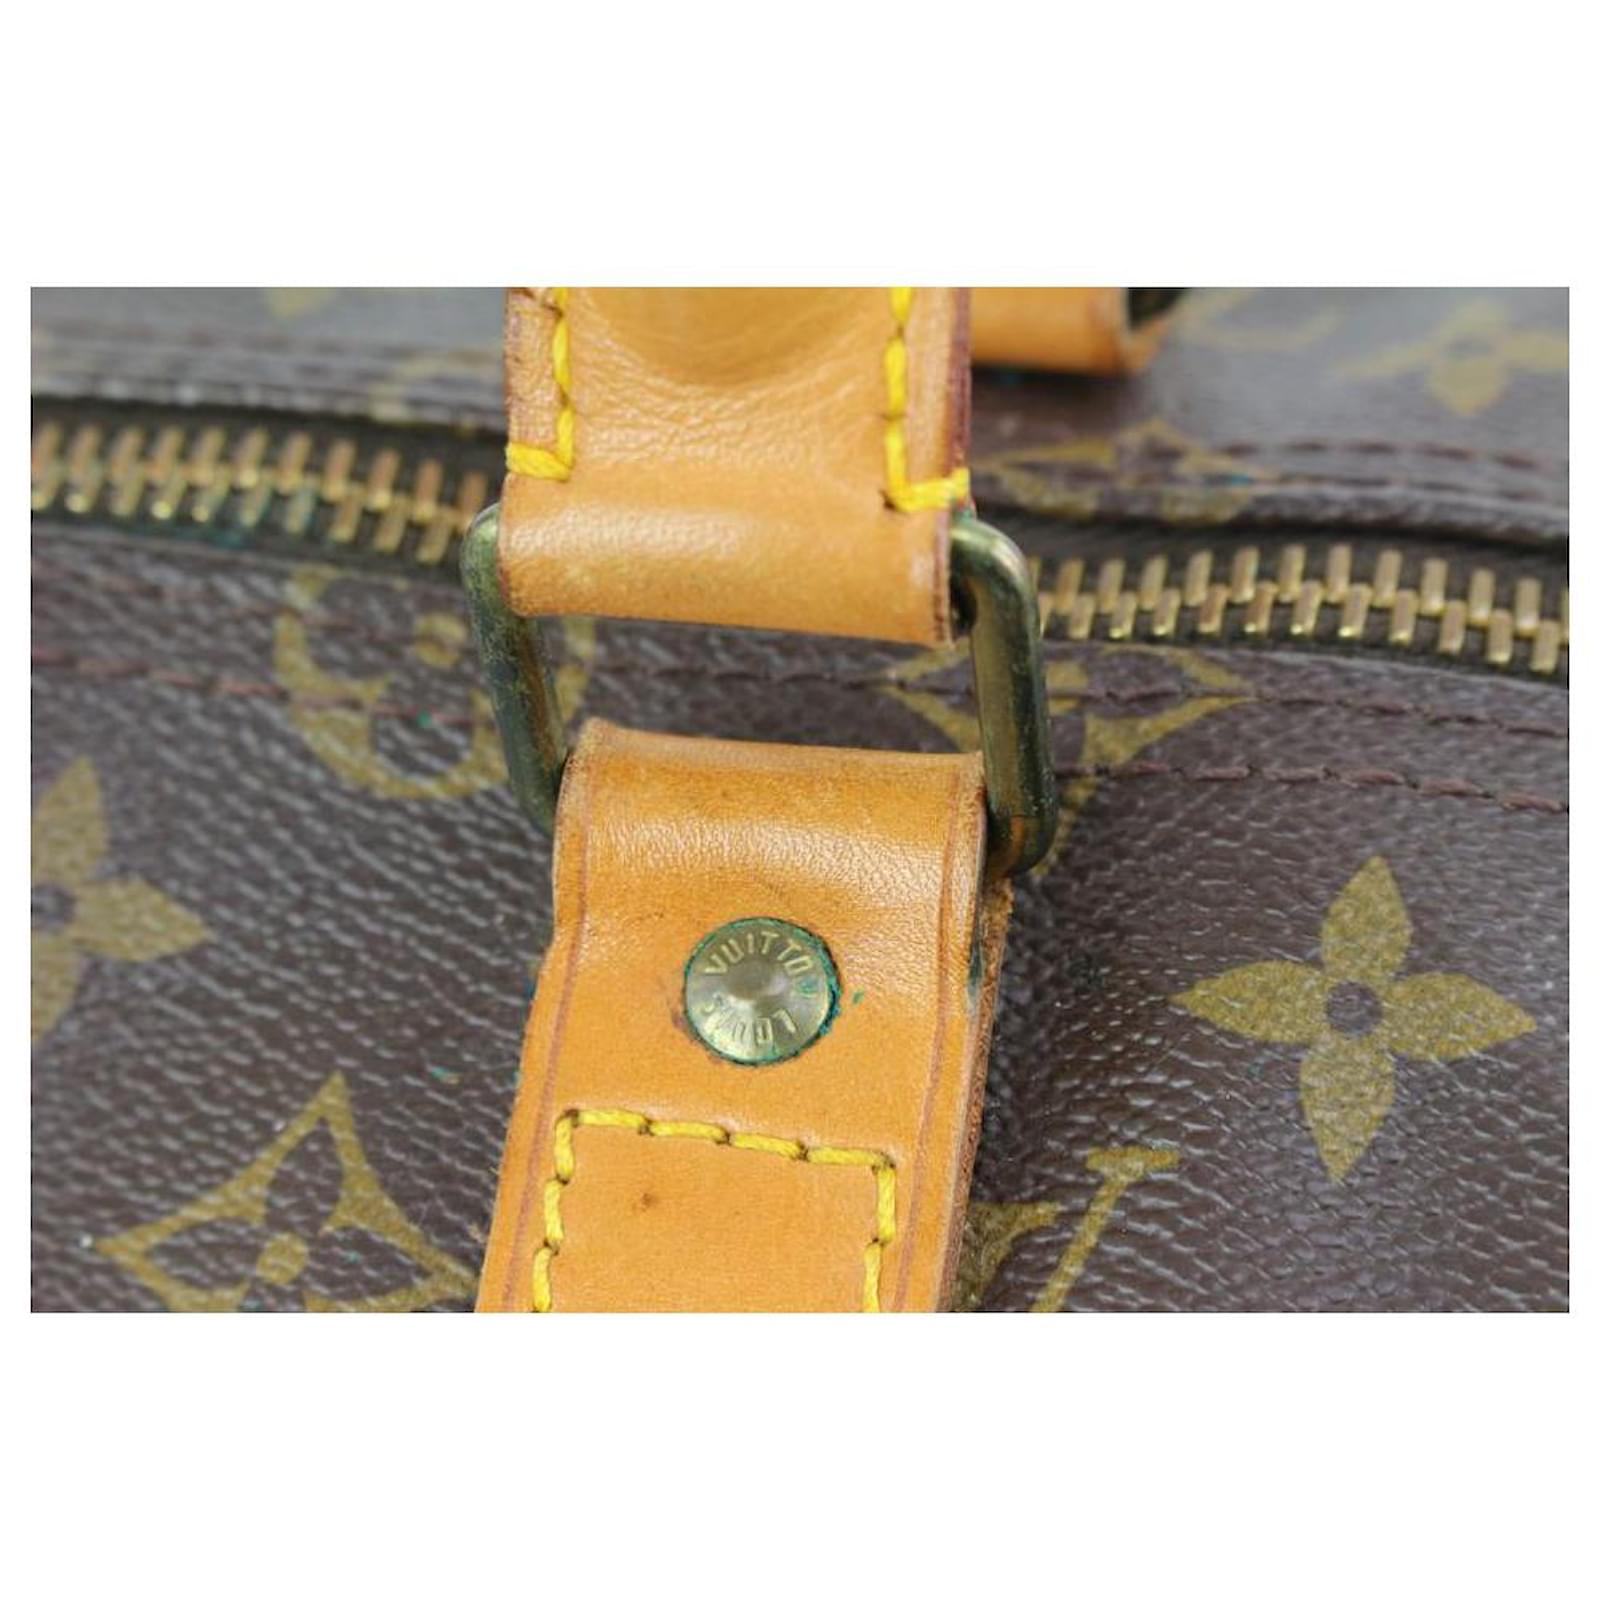 Louis Vuitton Monogram Keepall Bandouliere 55 Duffle Bag with Strap  89lv225s